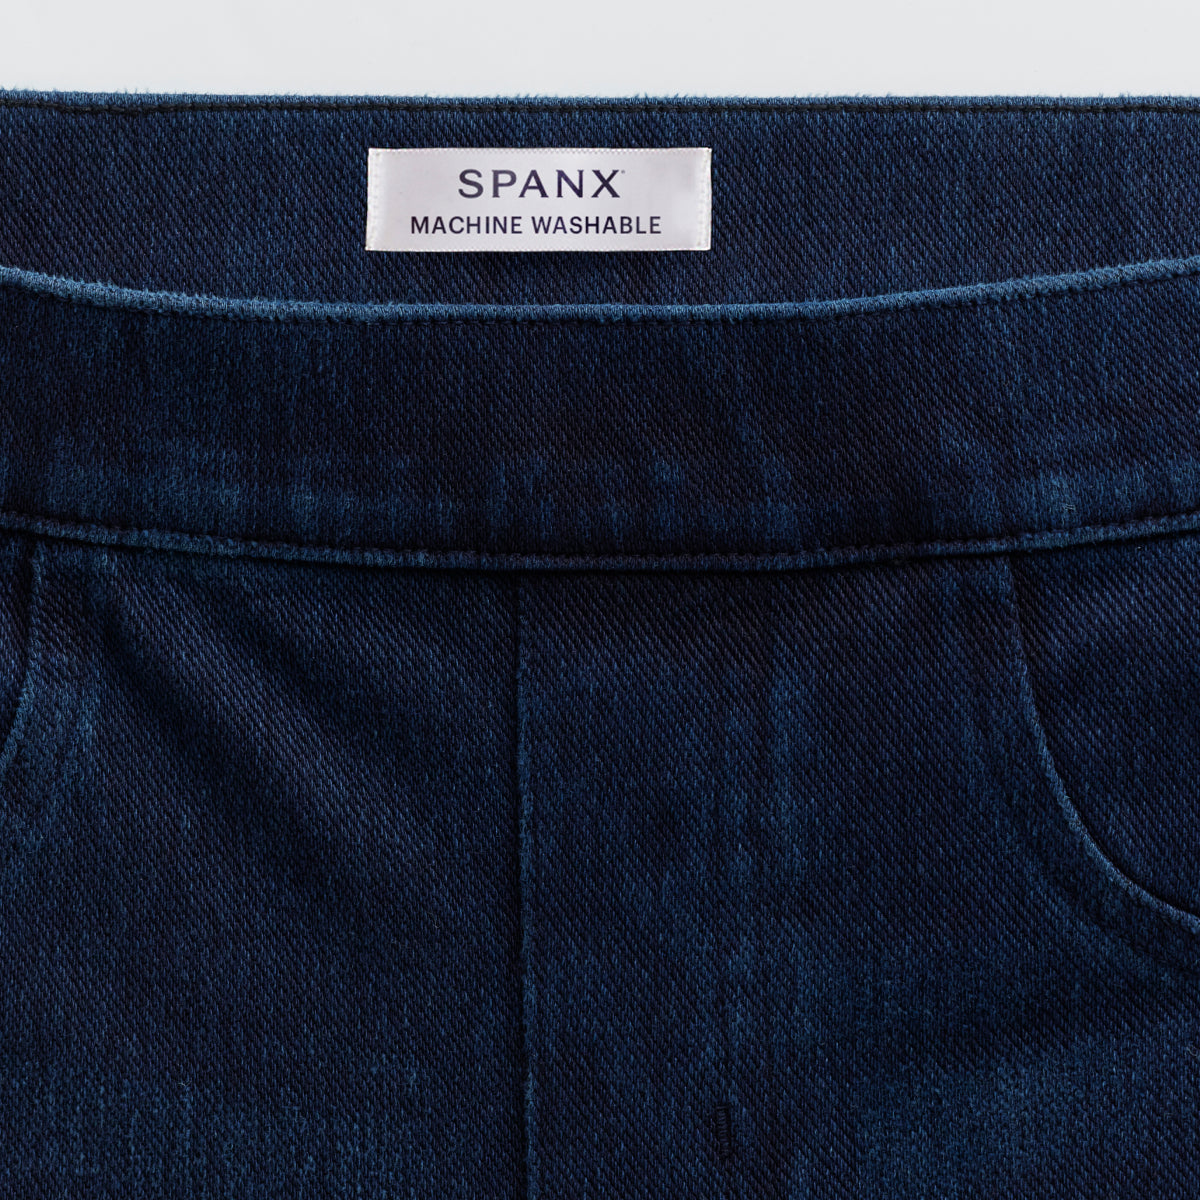 Jean-ious! Spanx introduces line of jeggings